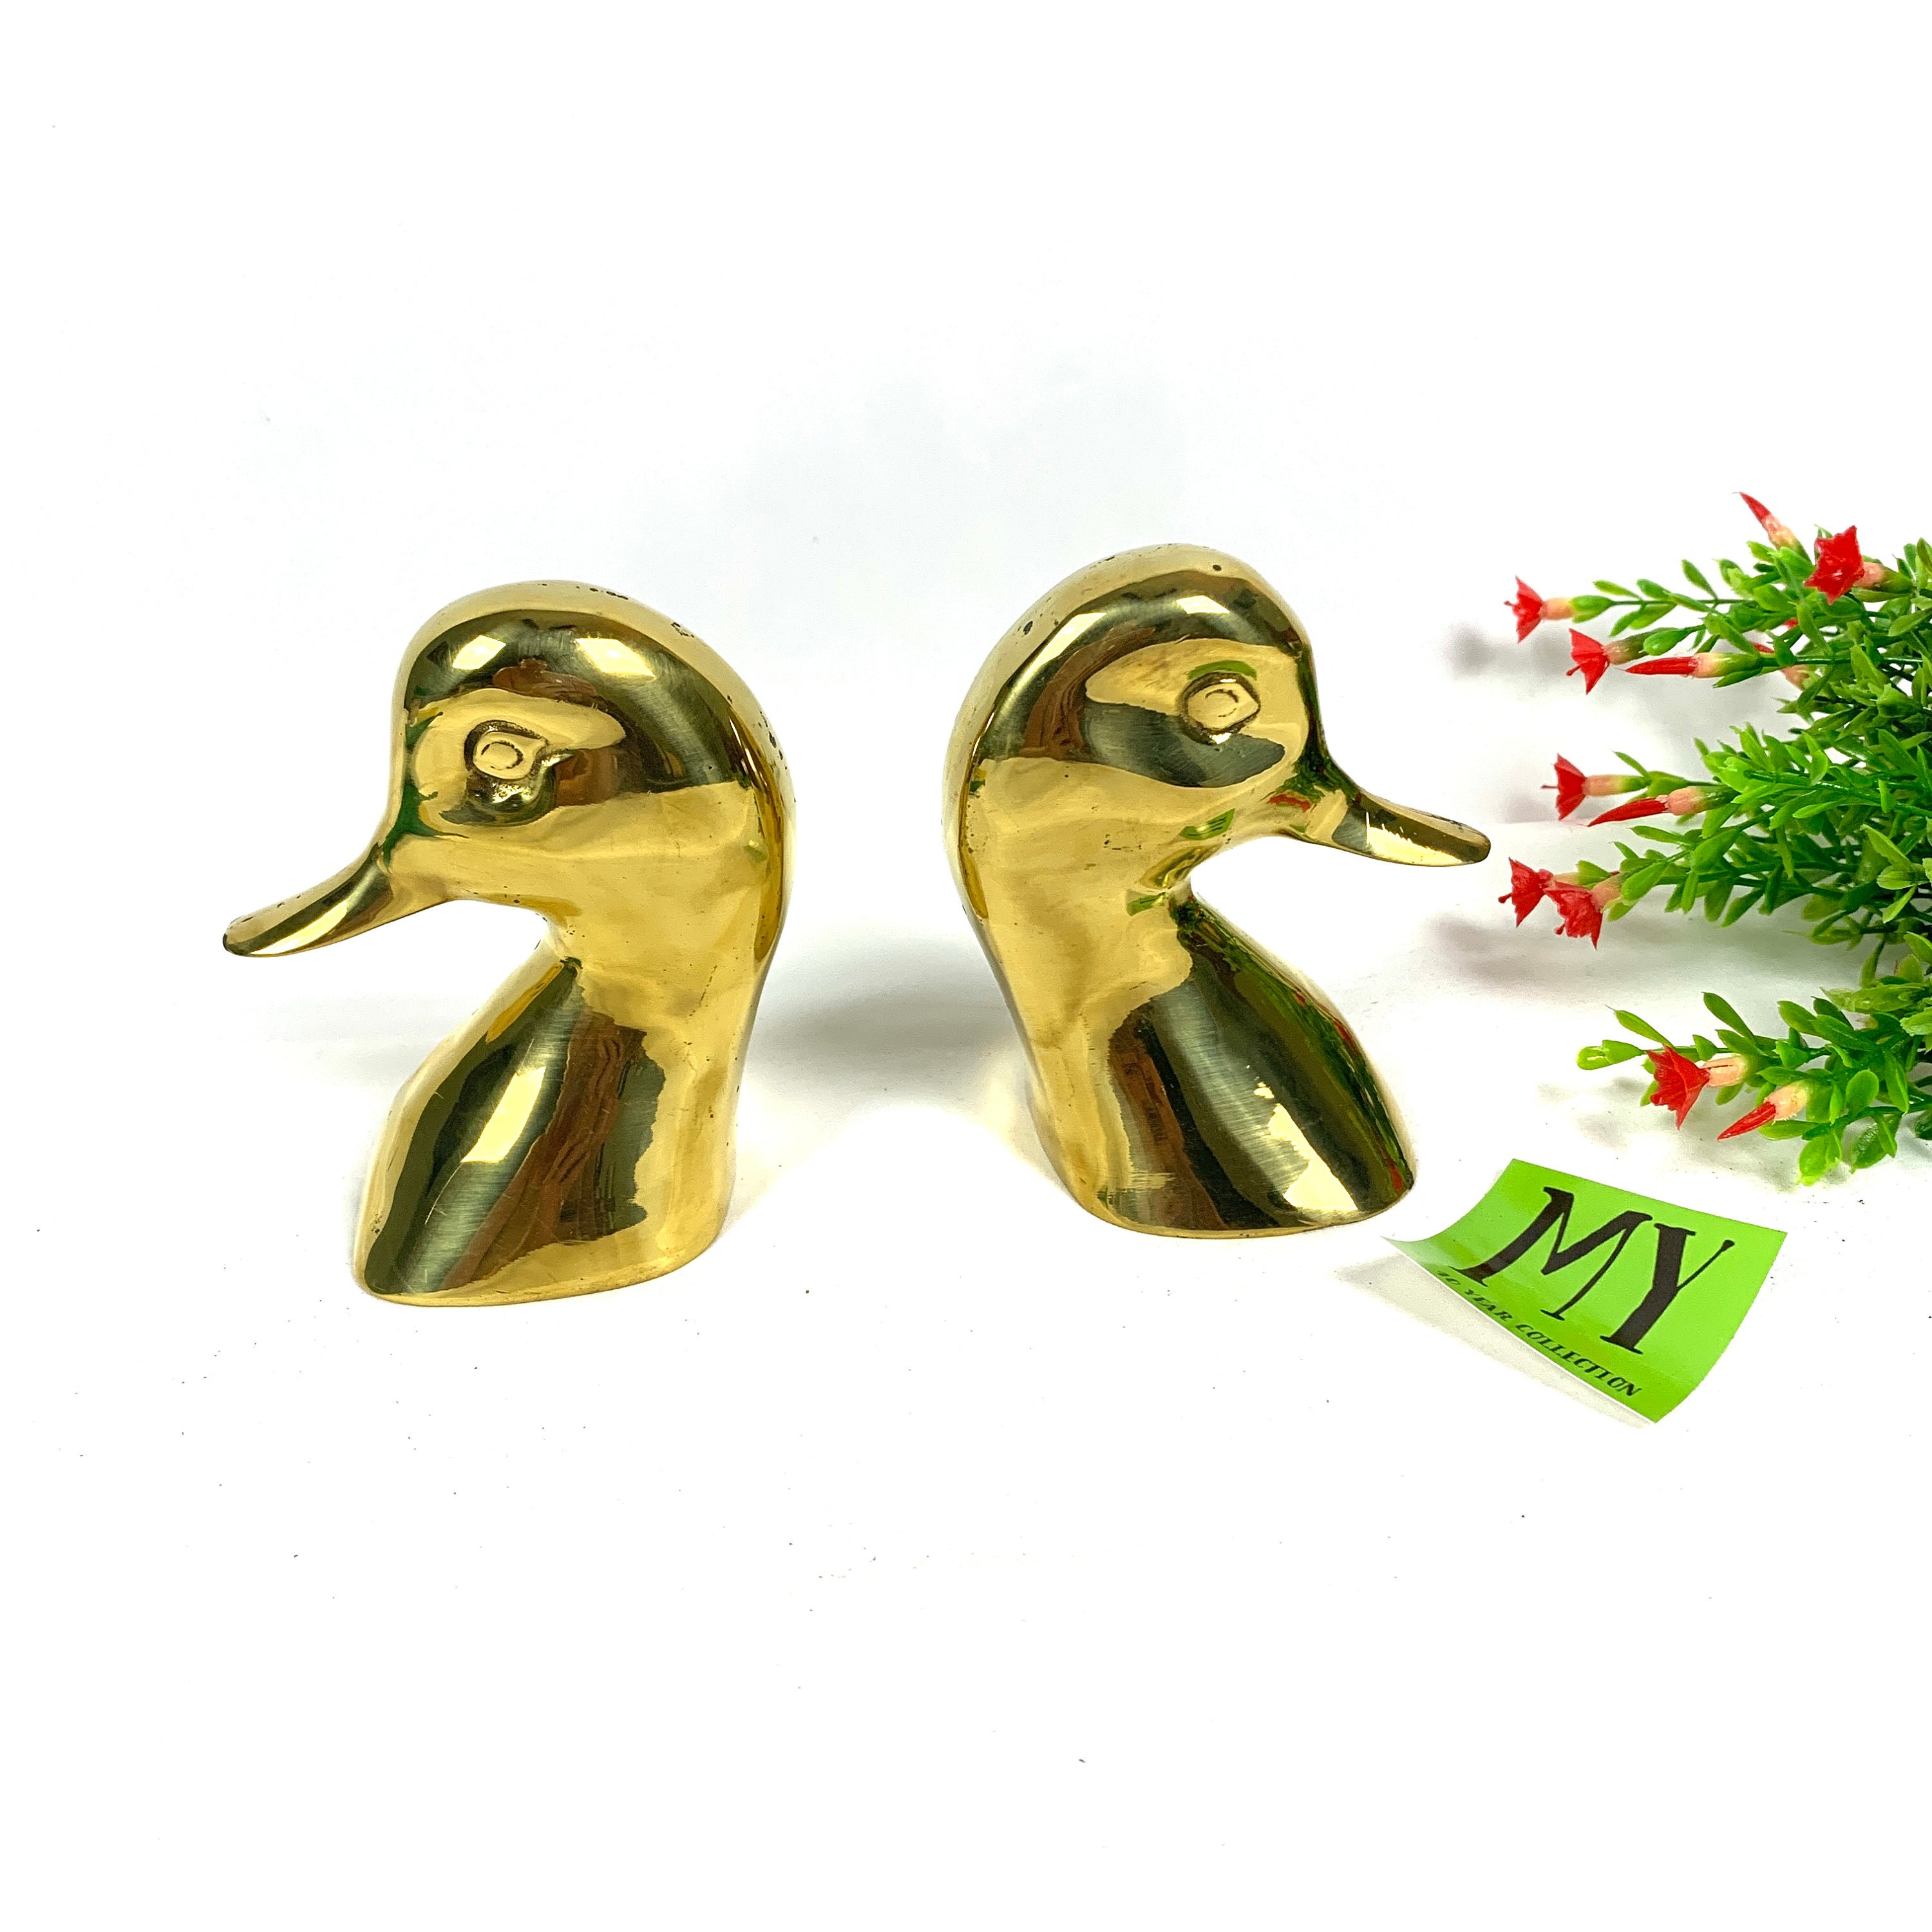 Vintage Solid Brass Duck Head Bookends Dessau Made in Taiwan